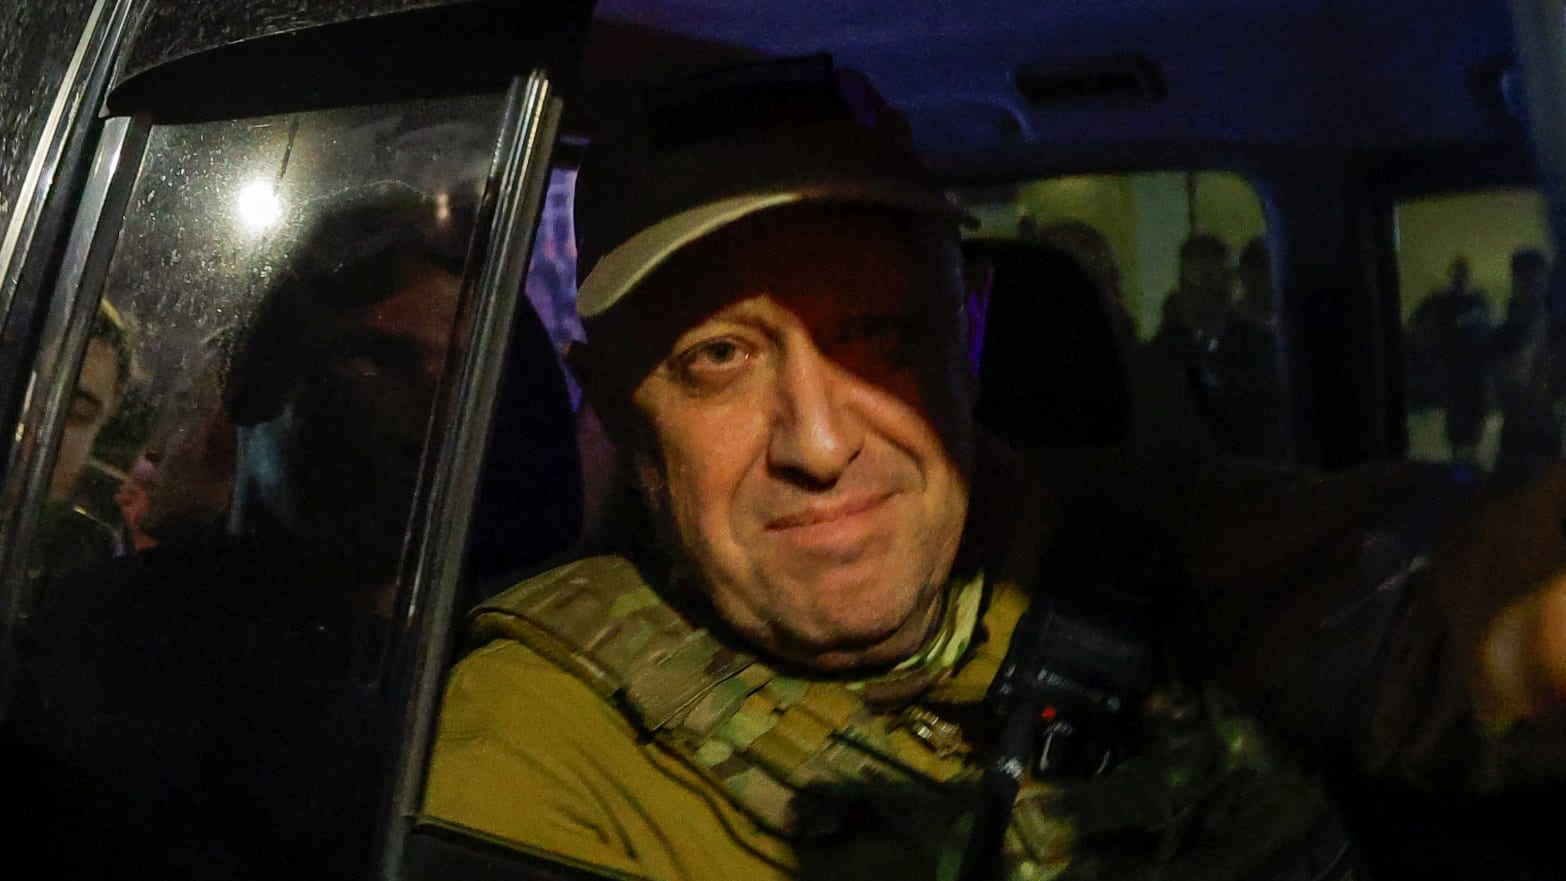 Wagner mercenary chief Yevgeny Prigozhin pictured as his troops pull out from mutiny in Russia.